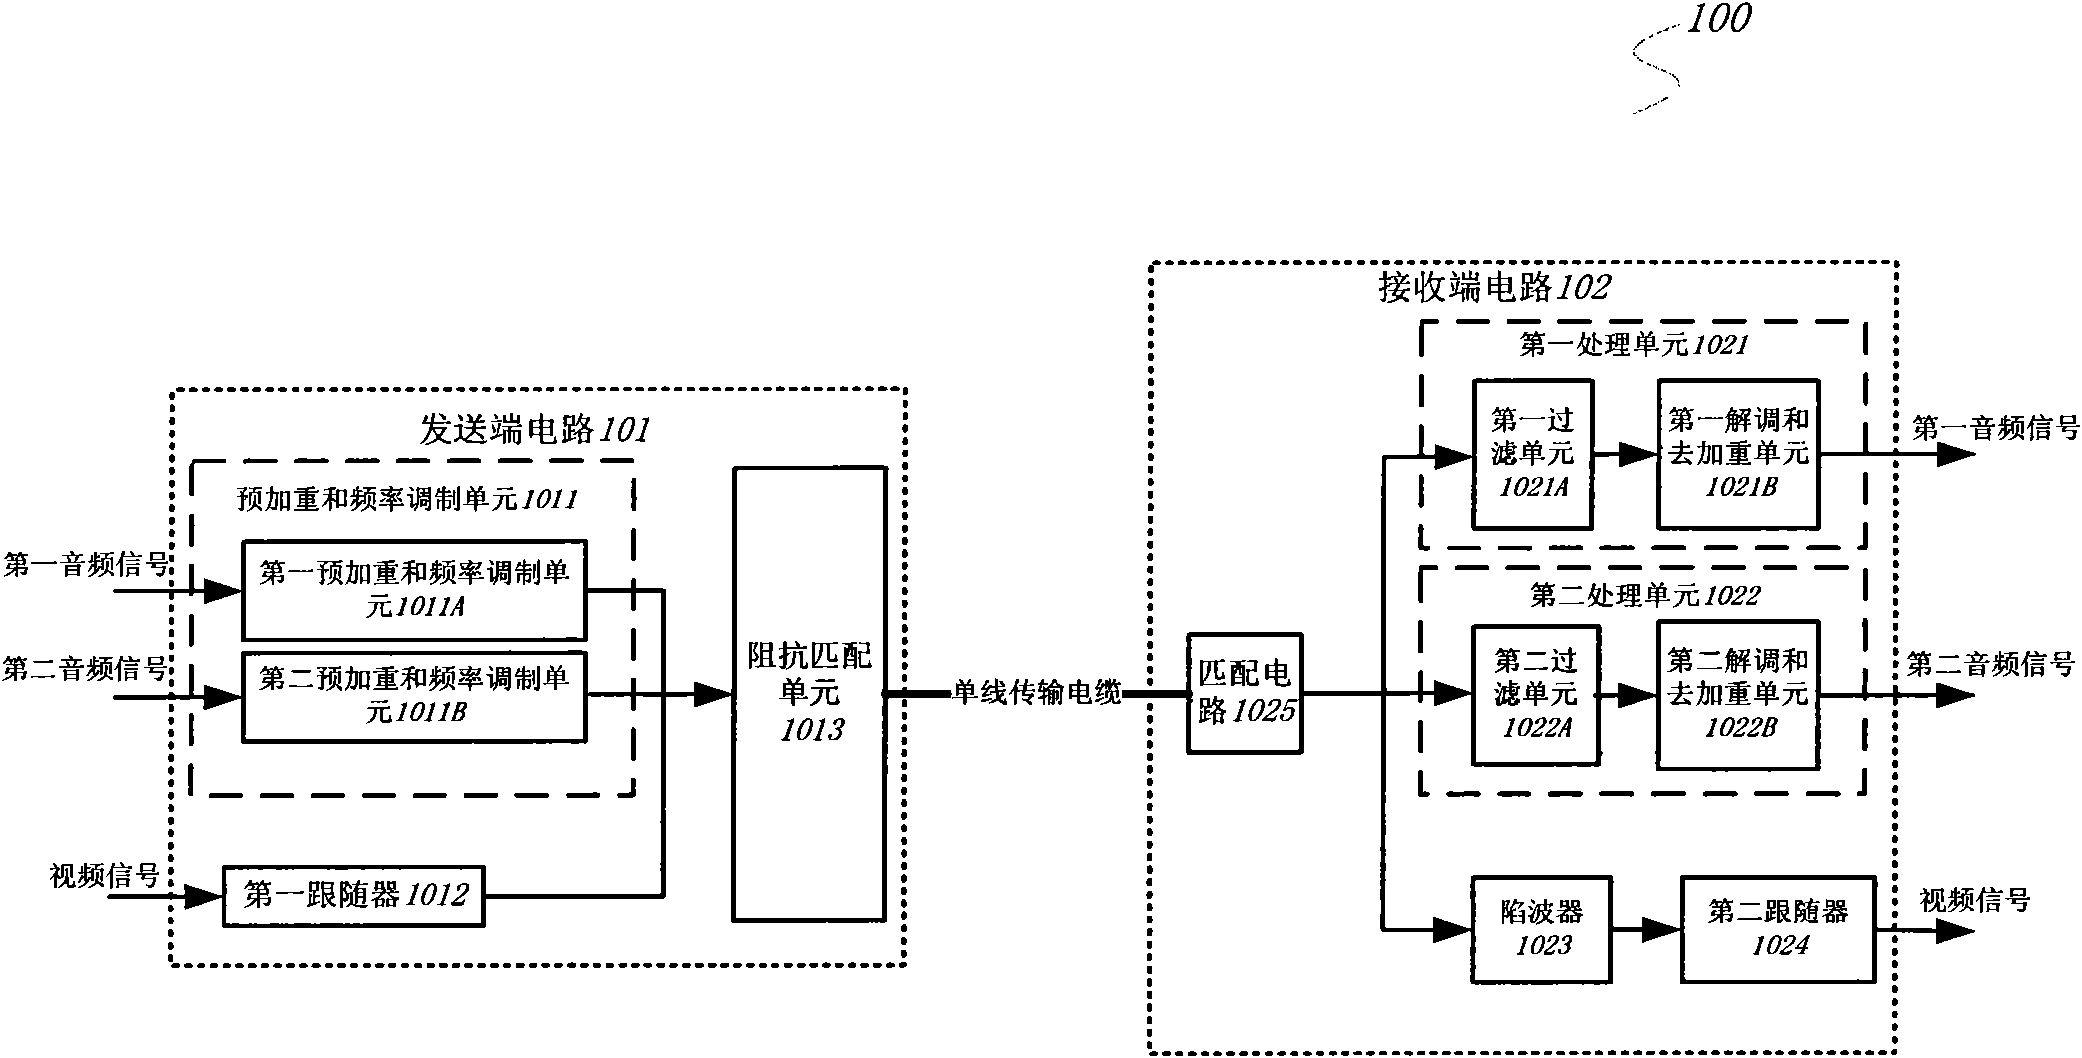 Circuit for realizing single wire transmission of audio and video signals